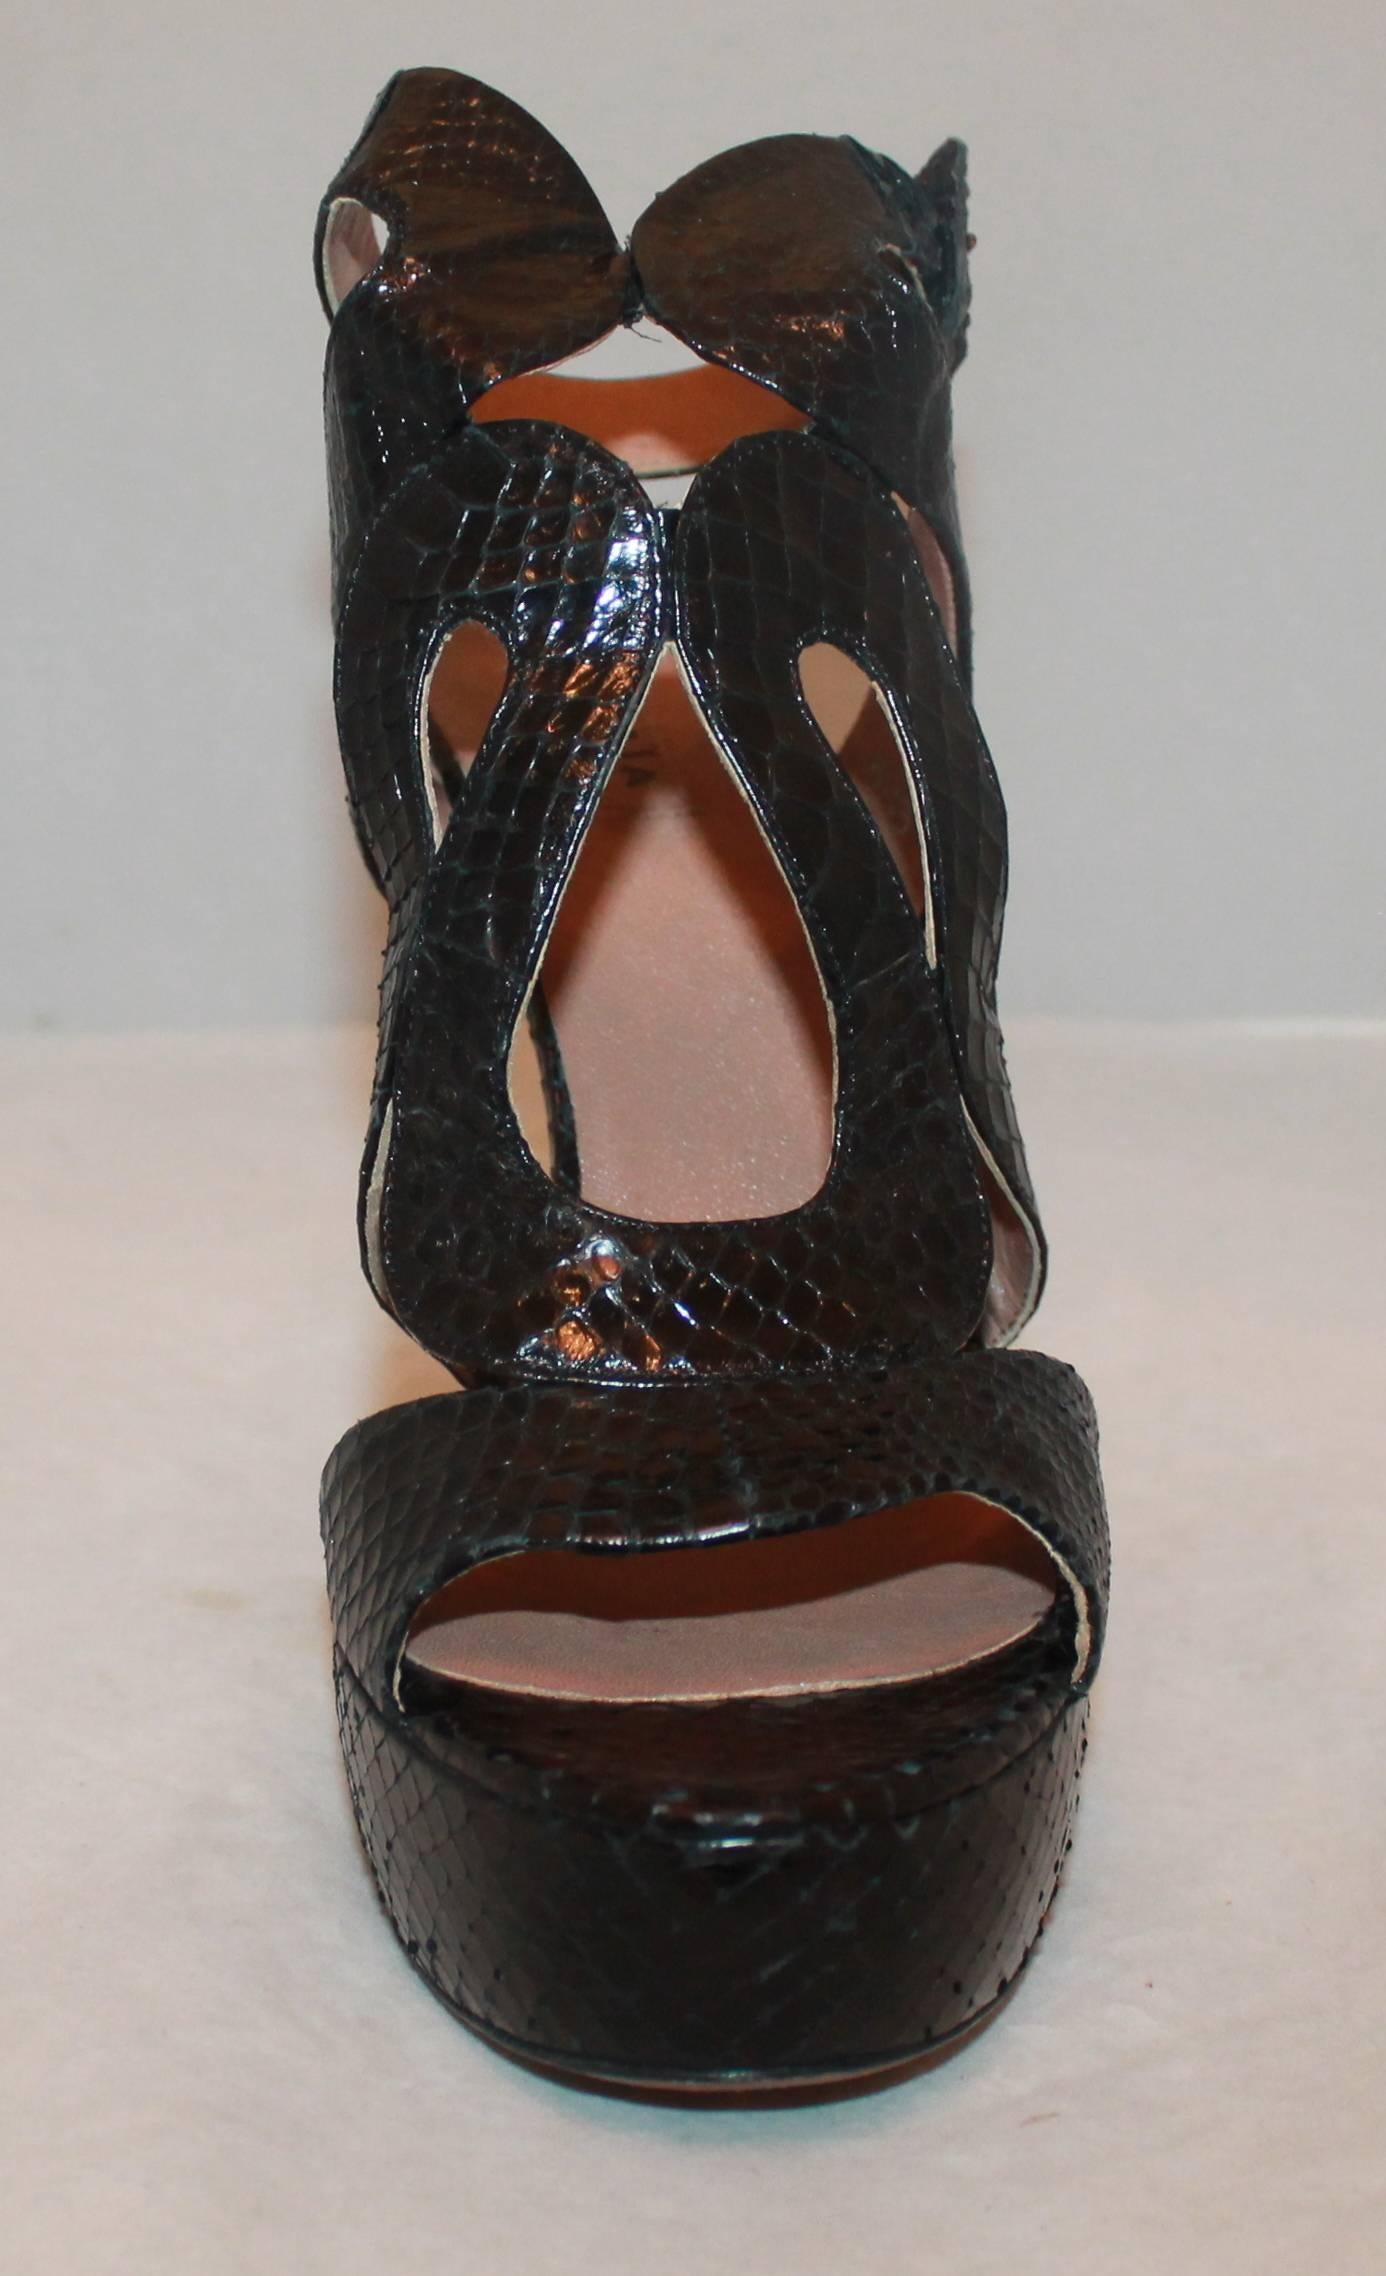 Alaia Black Plaform Cutout Snakeskin Heel - 40 In Good Condition For Sale In West Palm Beach, FL